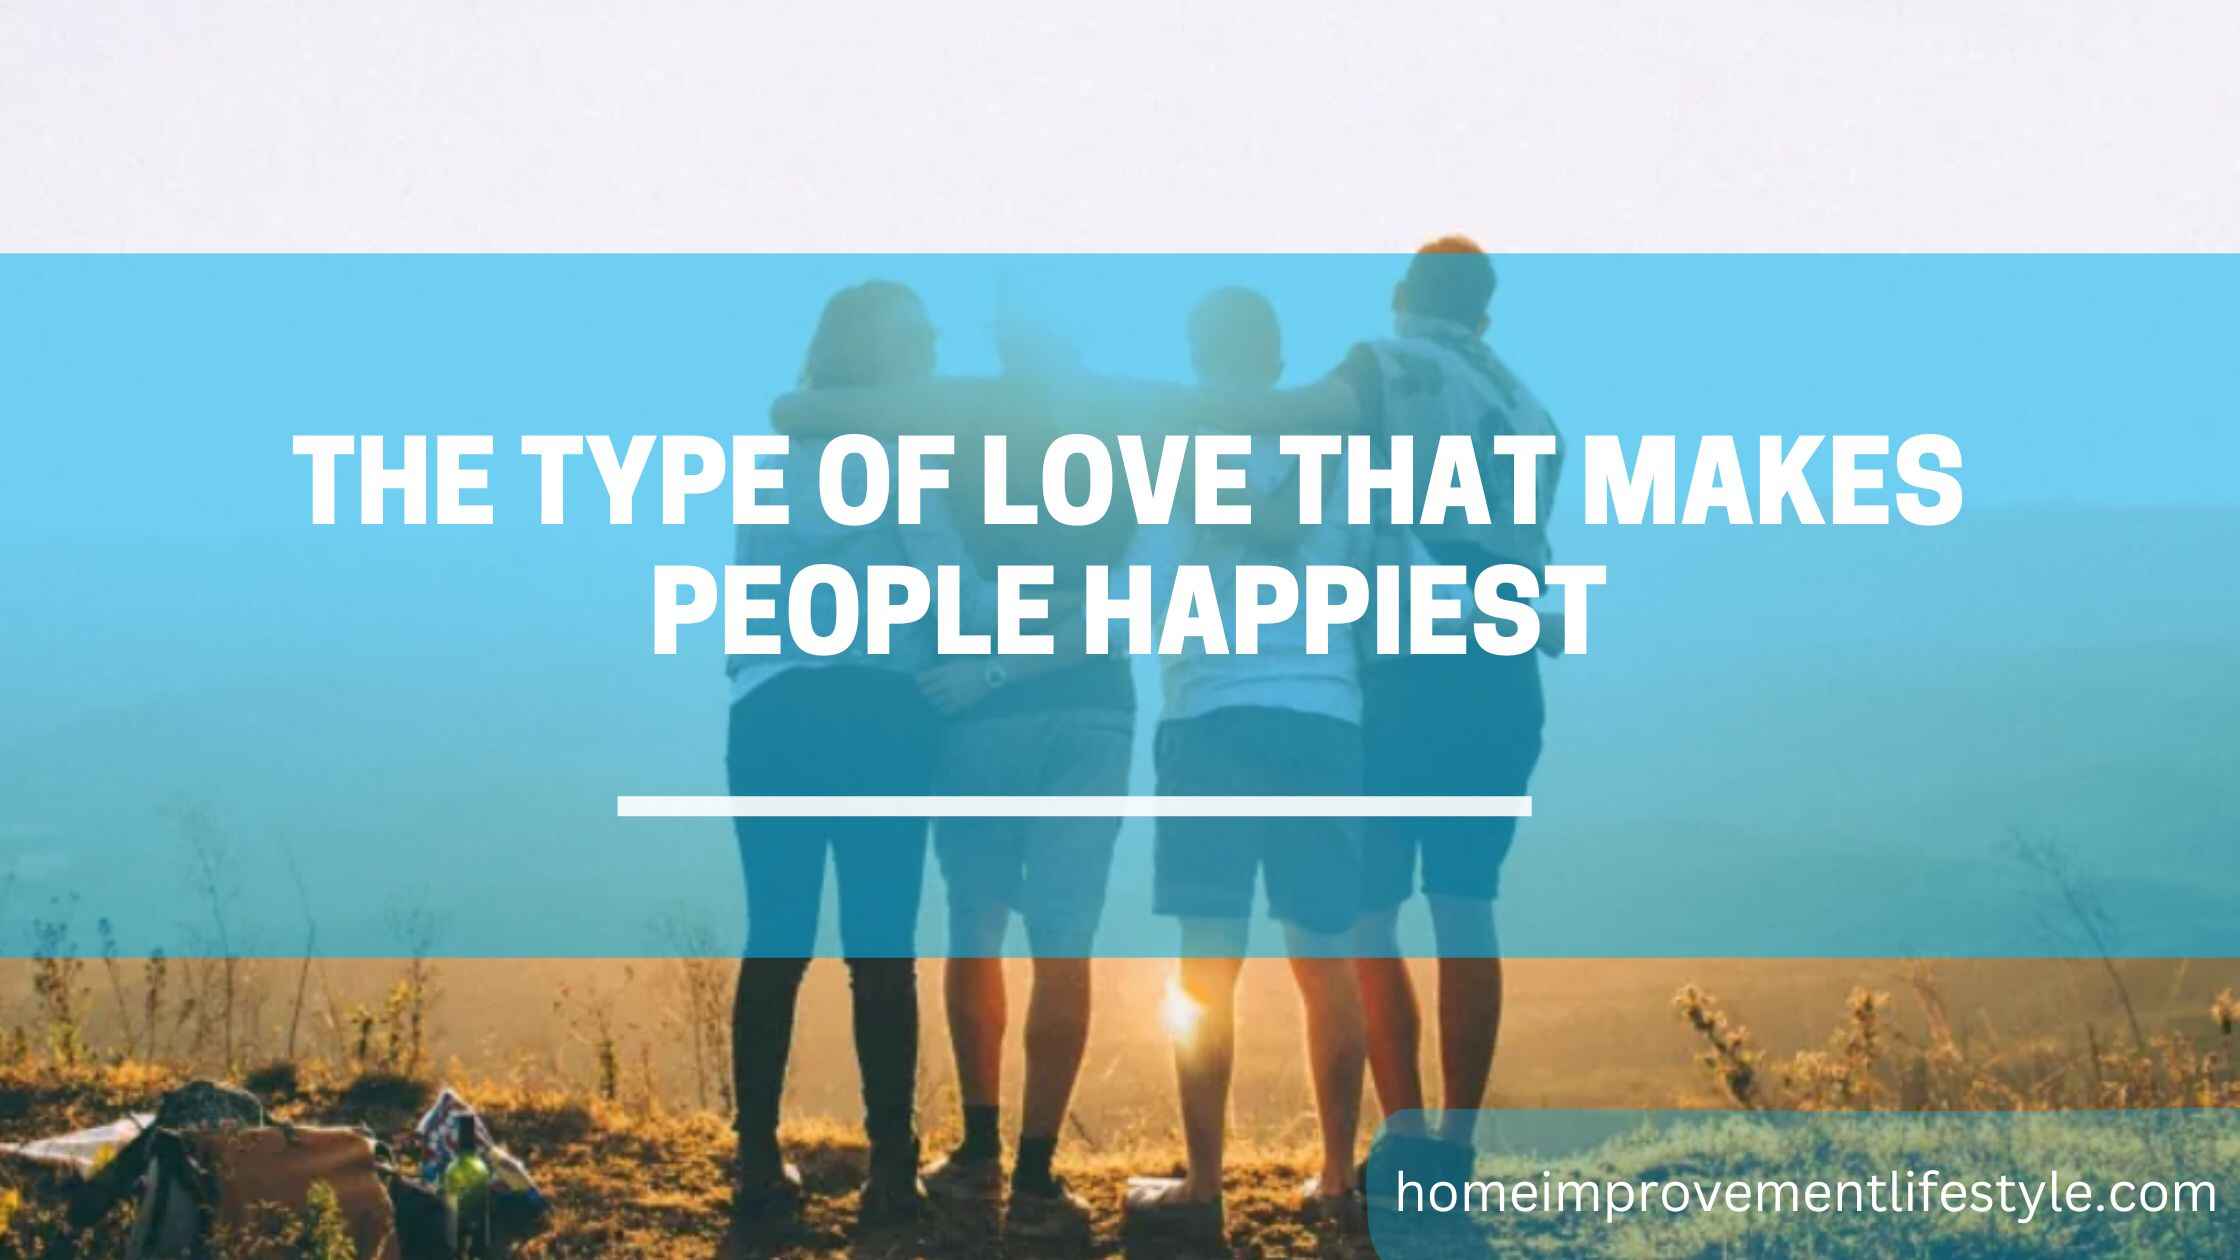 The Type of Love That Makes People Happiest